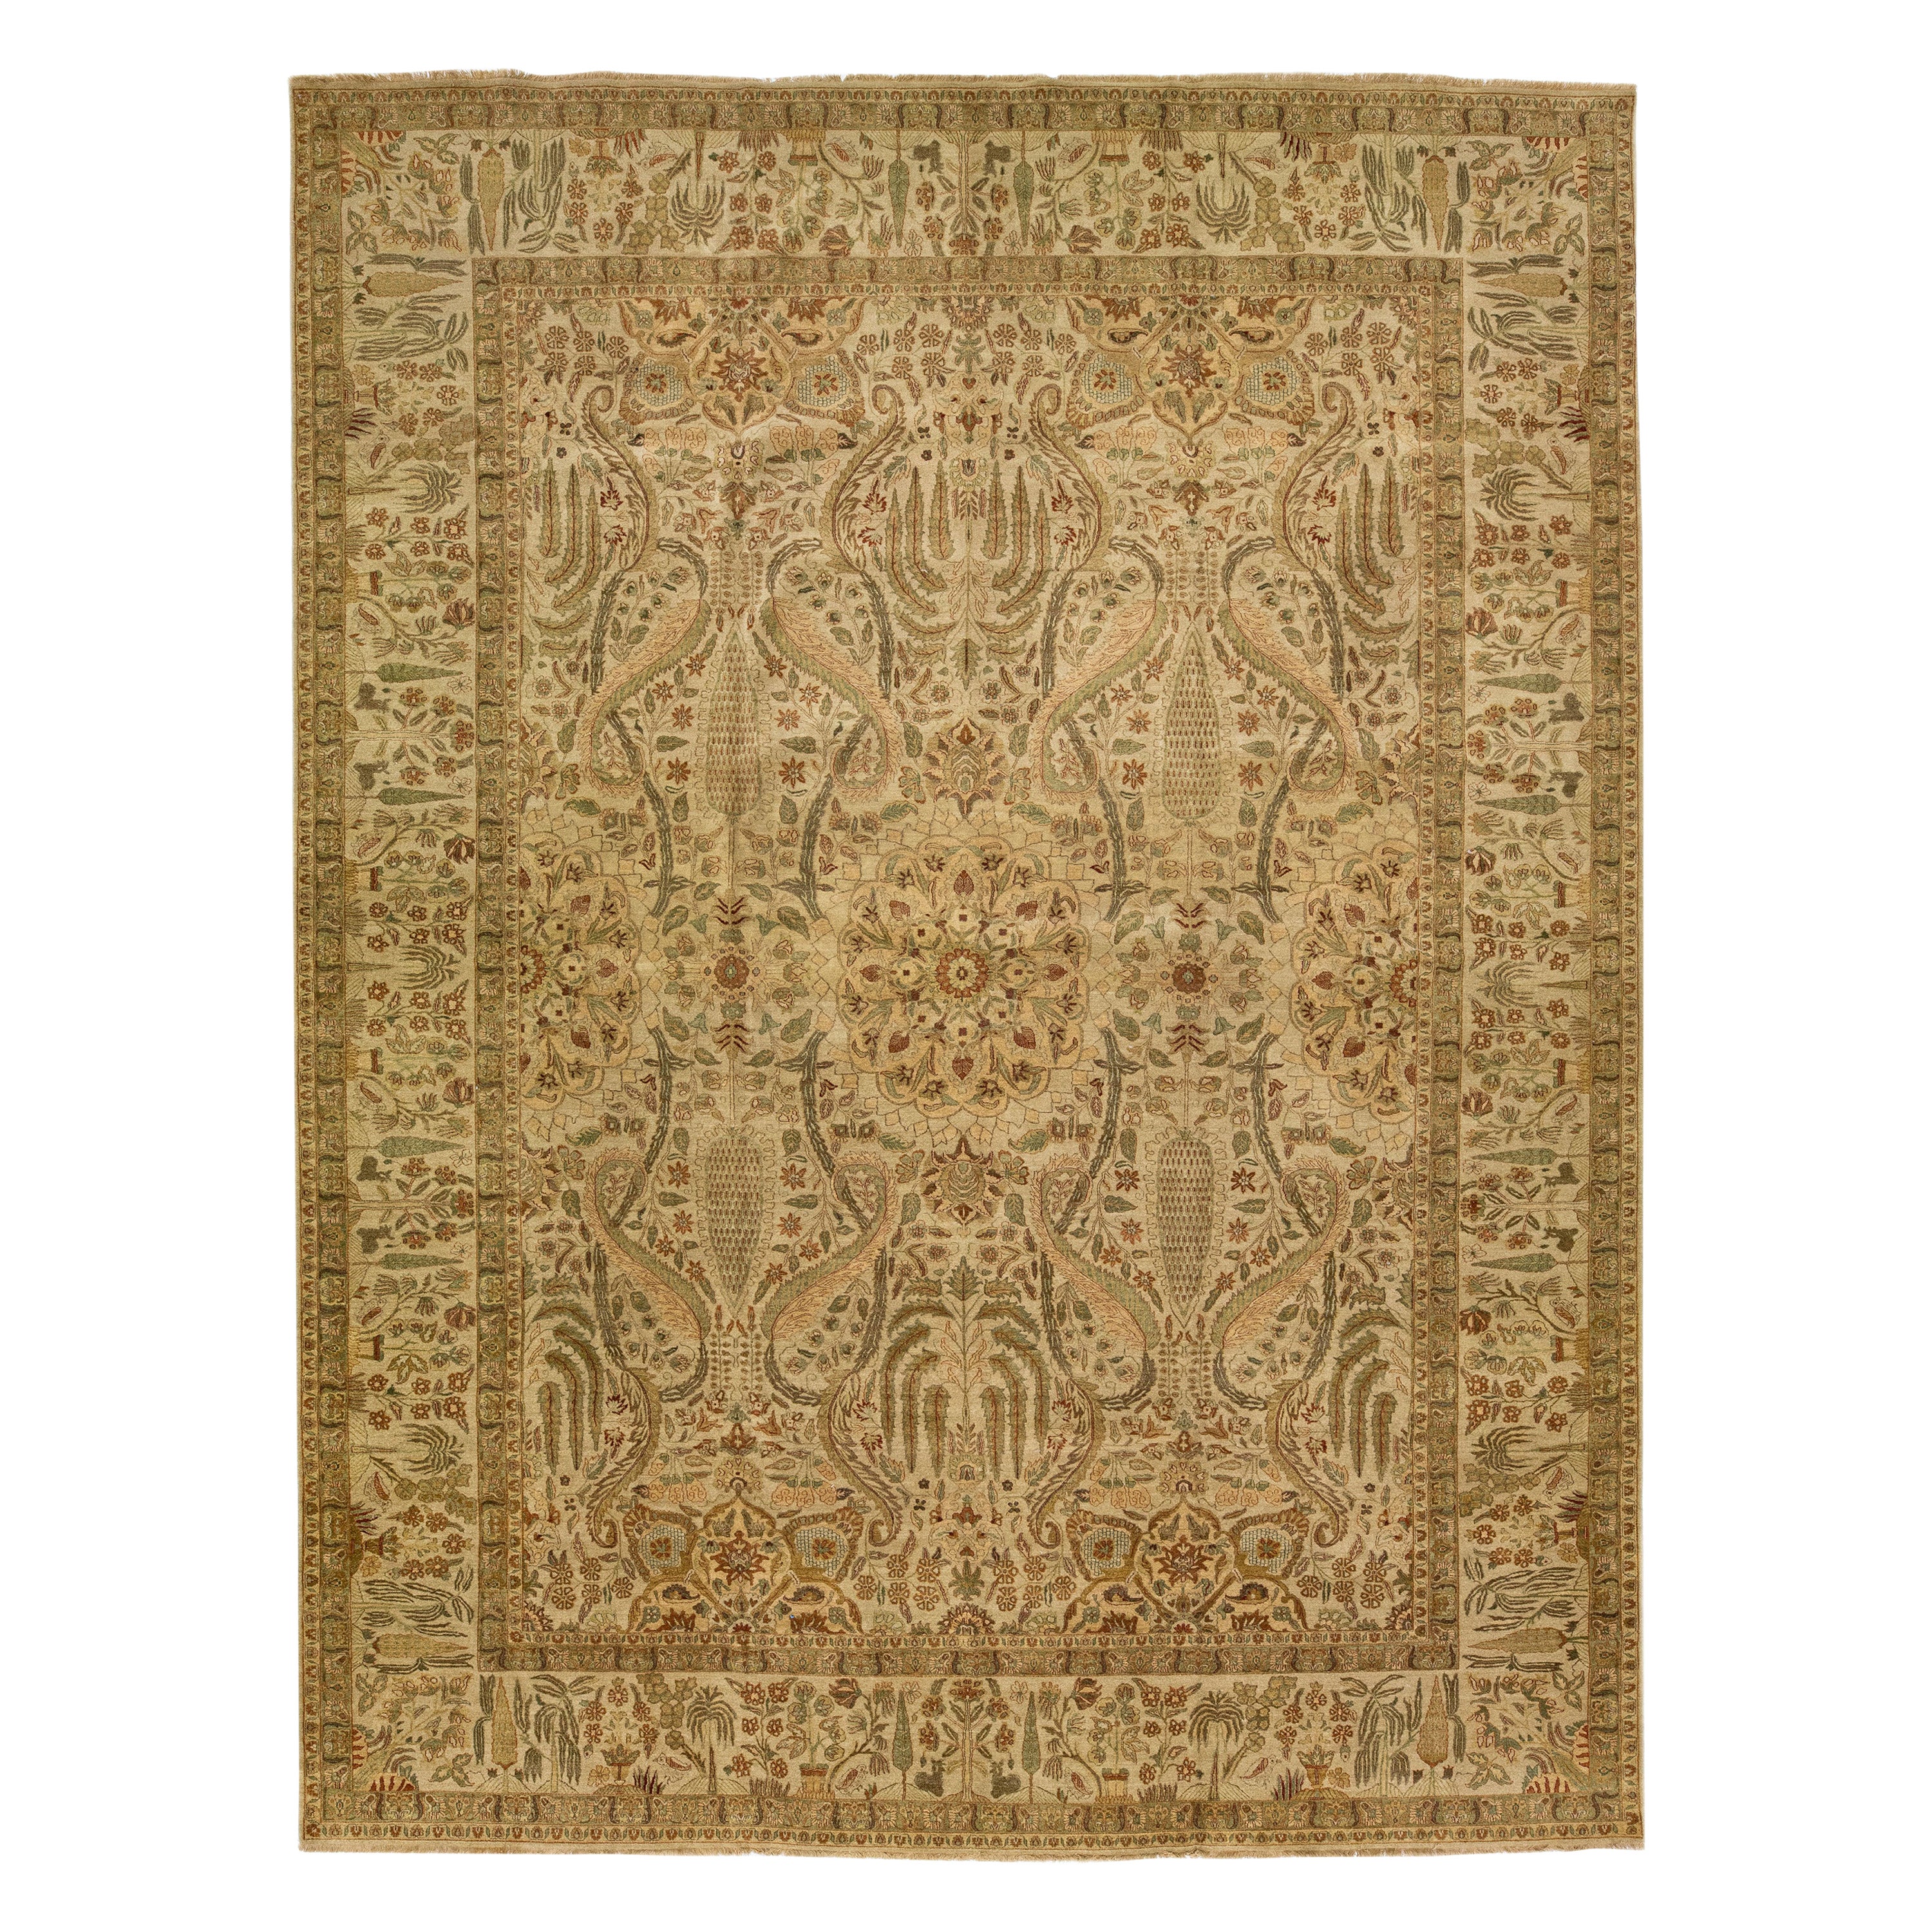 Tan Modern Indian Handmade Wool Rug With Allover Floral Motif 